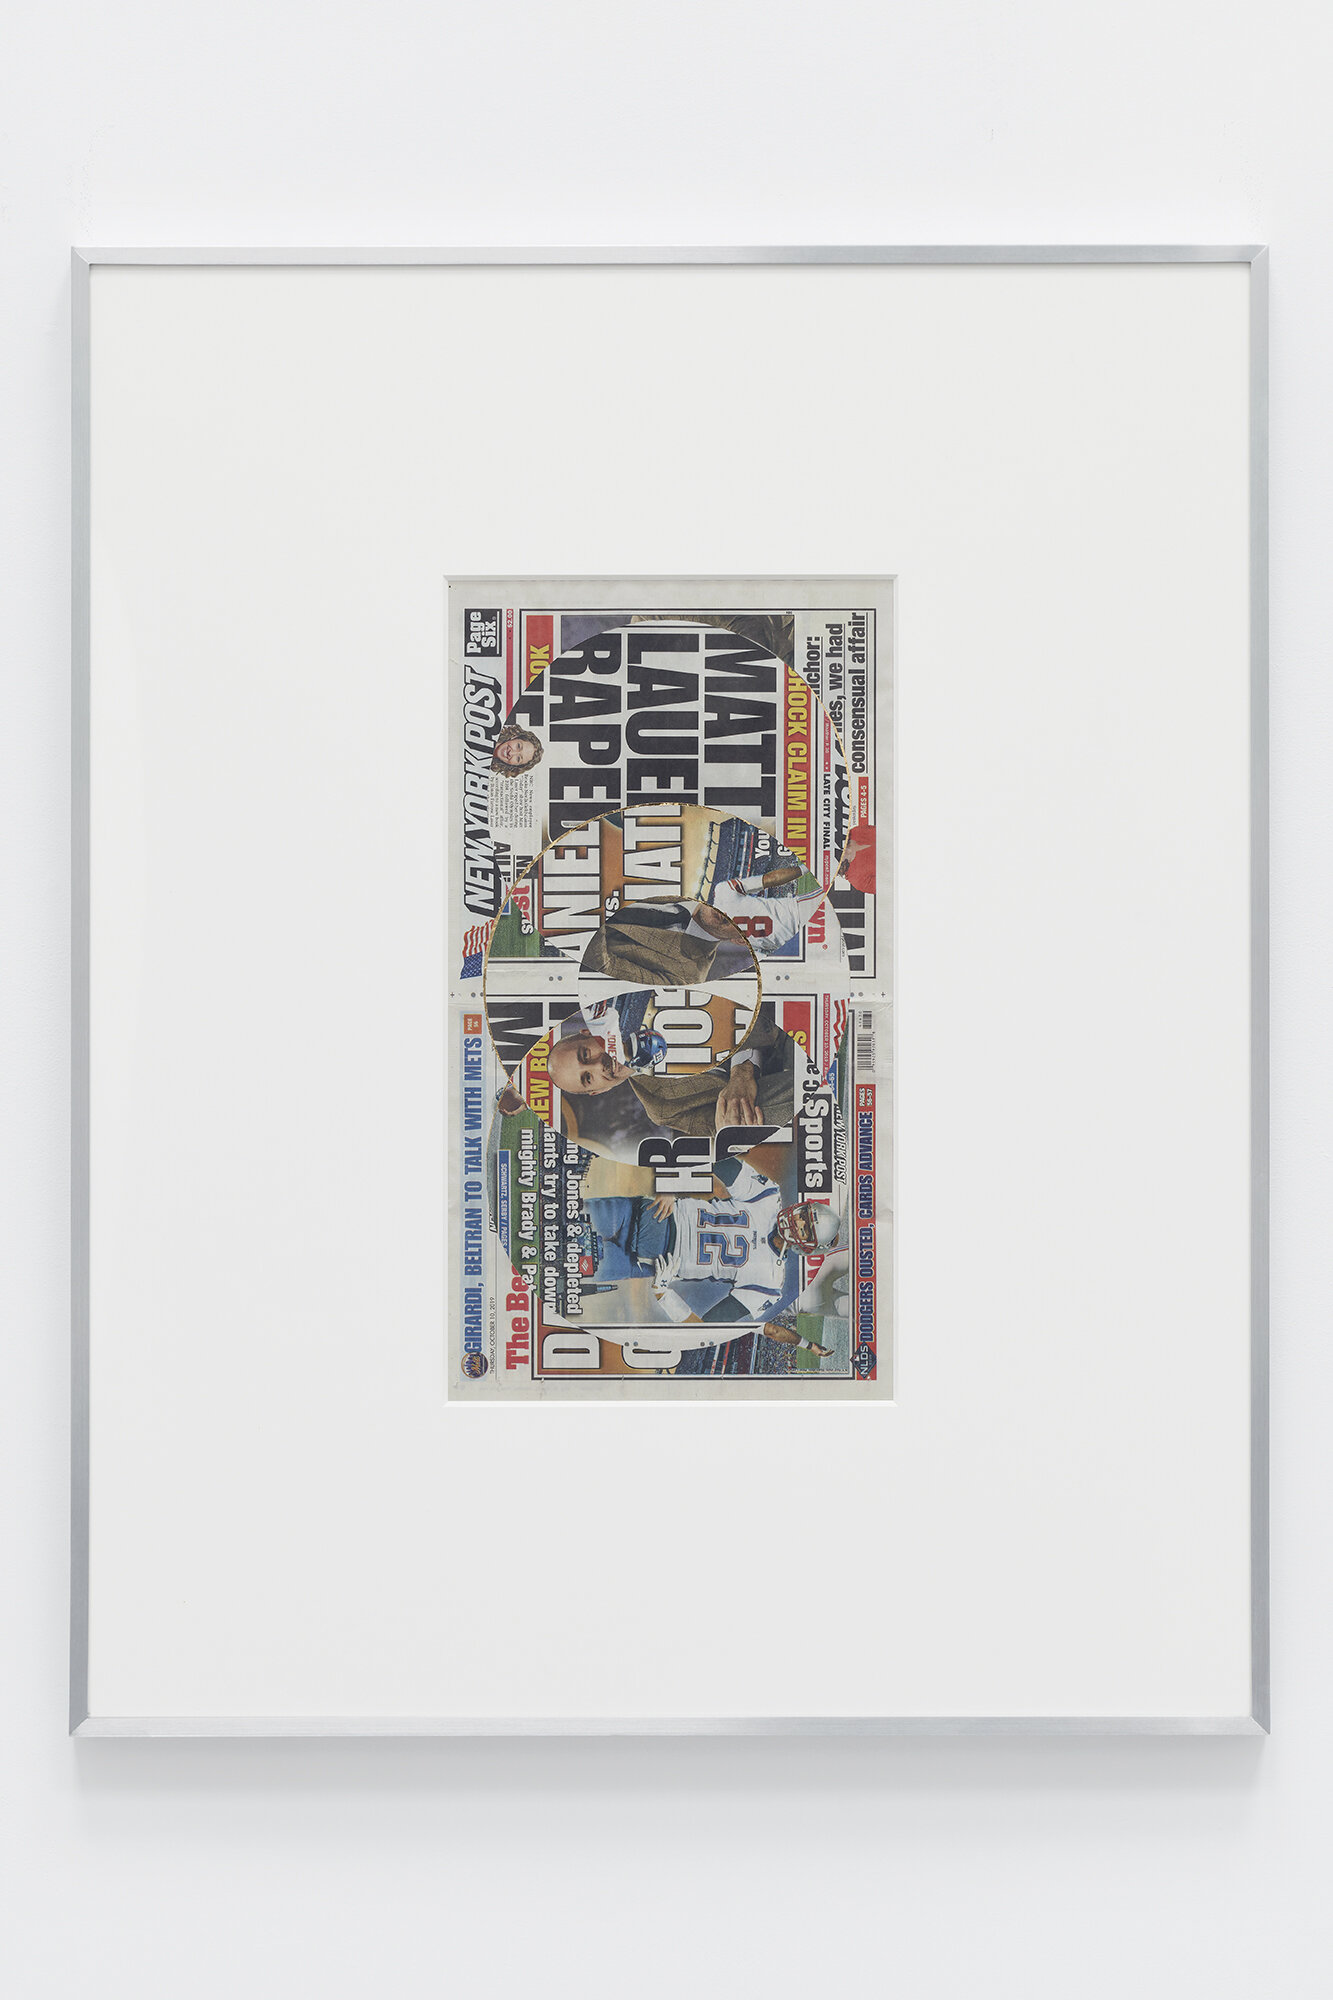   Blind Collage (Two 180º Rotations, New York Post, Thursday, October 10, 2019)    2019   Newspaper, tape, and 22 karat gold leaf  39 1/8 x 31 1/4 inches  Exhibition:  Abstract of a Partial Disassembling of an Invention without a Future … , 2019    